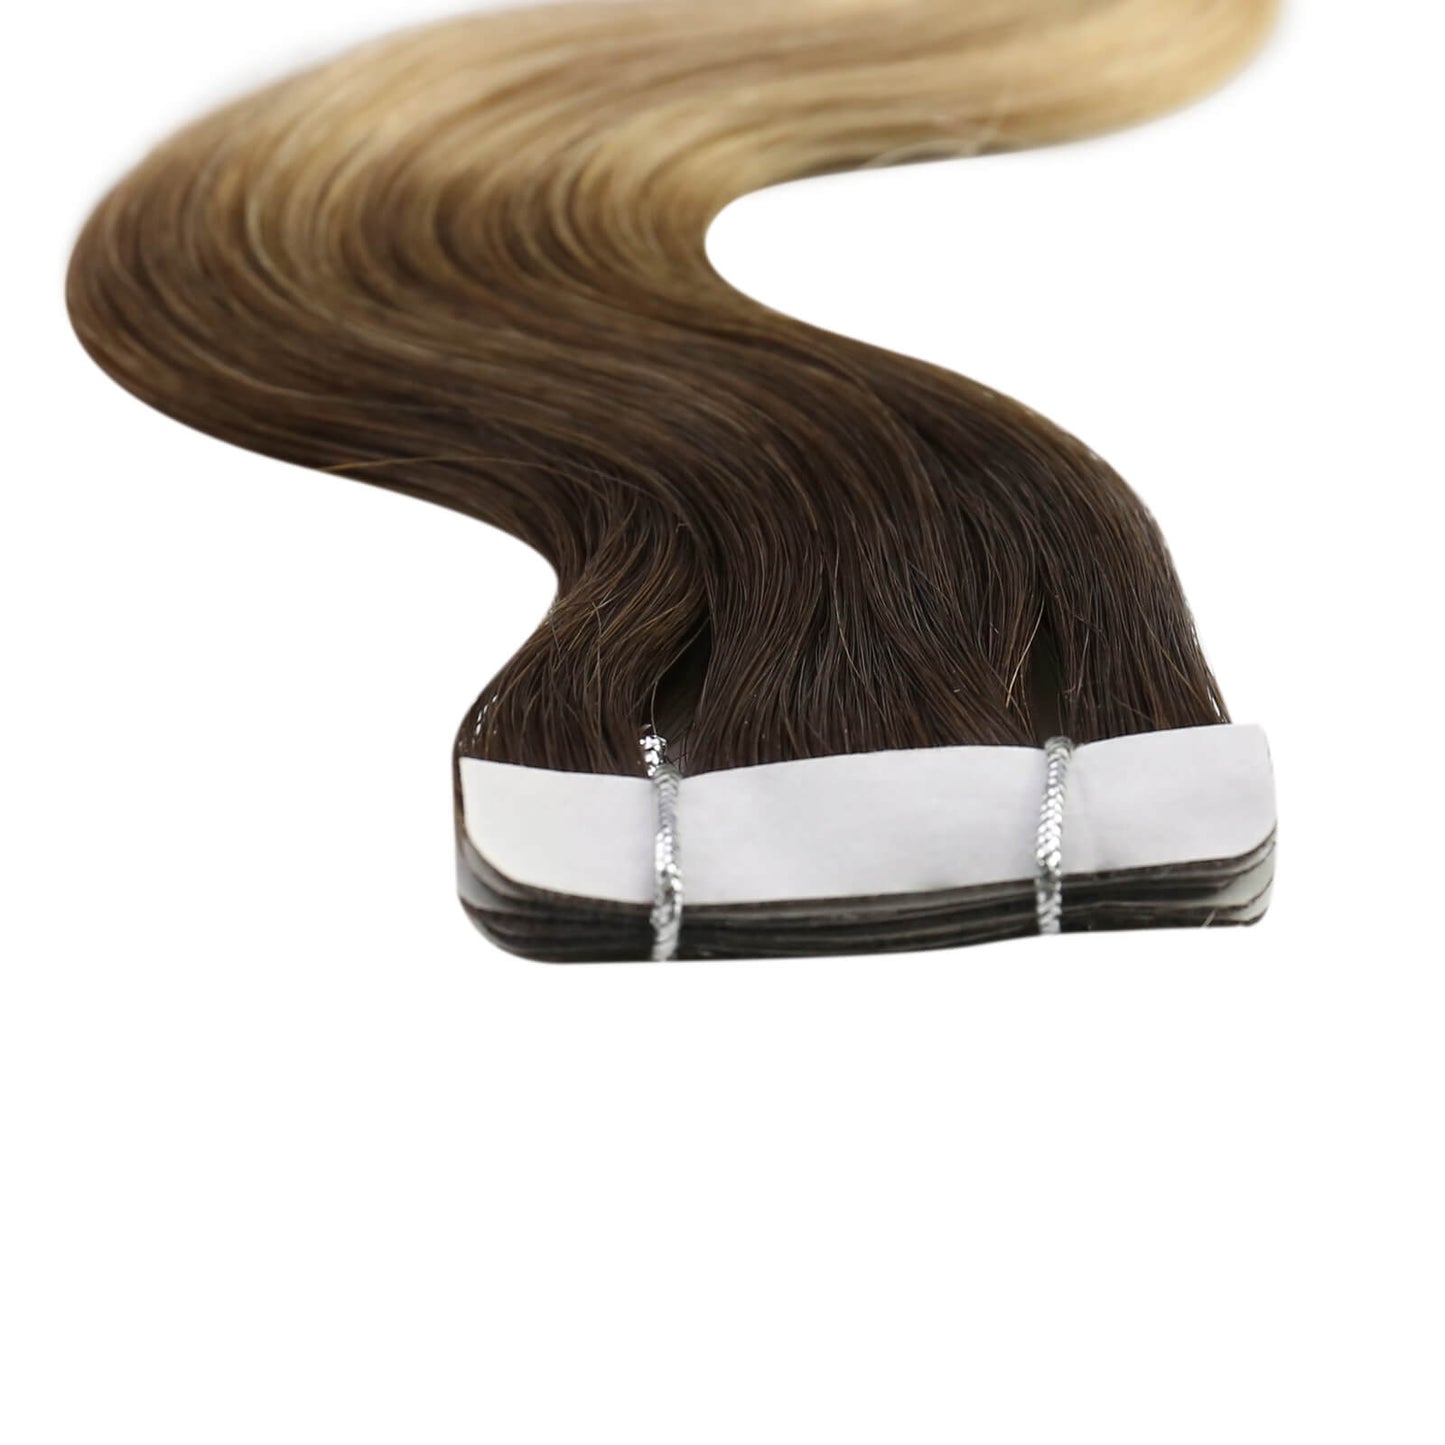 virgin human hair extensions professional wavy tape in hair extensions